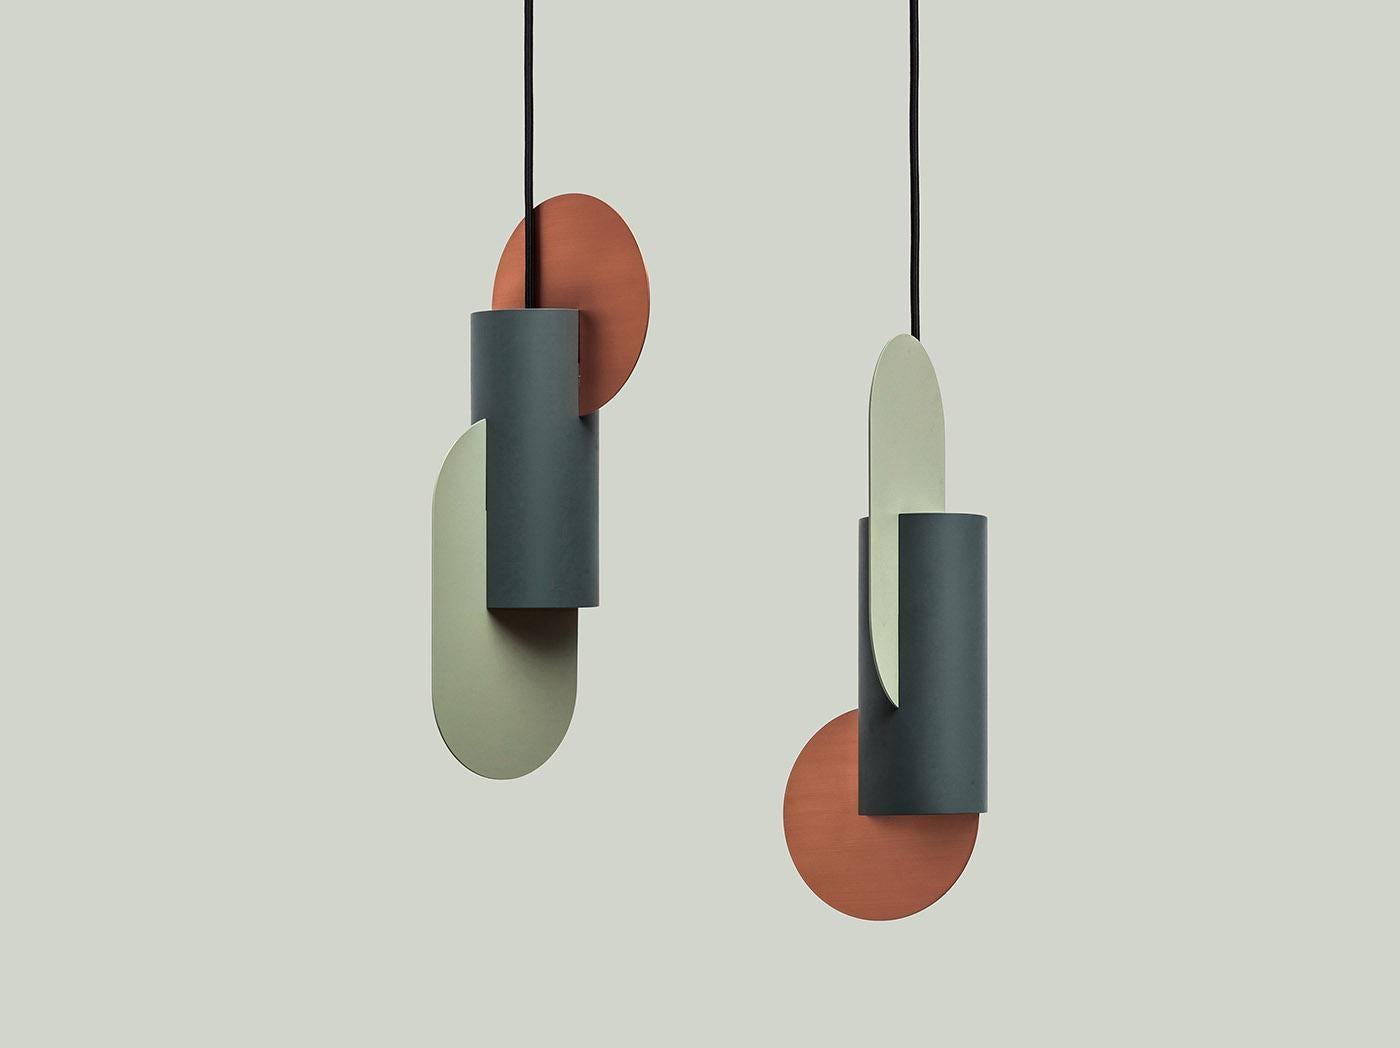 Suprematic lighting collection inspired by the geometric works of the great Suprematist Kazimir Malevich. 
Suprematism is a modernist movement in the art of the early twentieth century, focused on the basic geometric forms, such as circles, squares,